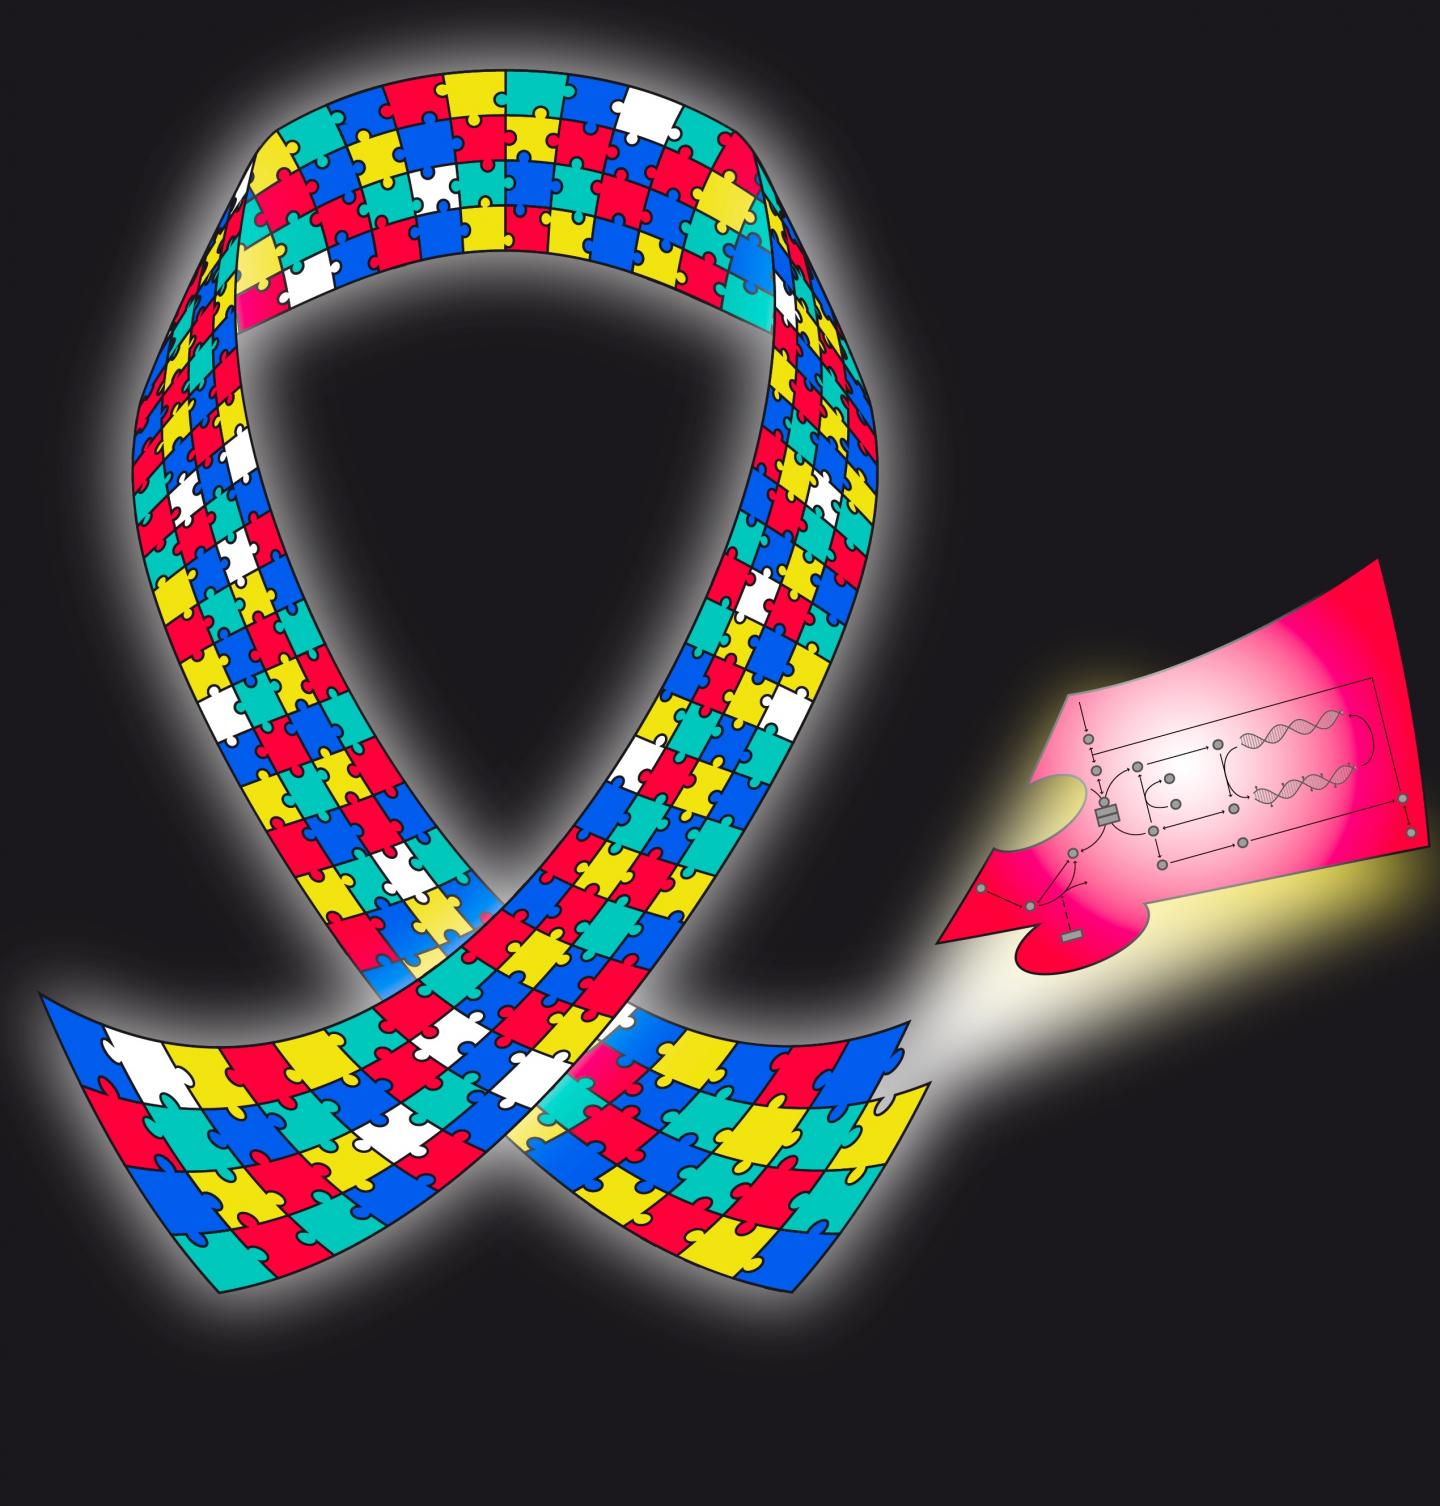 The autism awareness ribbon symbolizes the diverse experiences of people and families living with ASD. Here, it also represents the various genetic and environmental effects on the pathophysiology of ASD. The white pieces represent currently unknown effects. However, the red piece illustrating folate-dependent one-carbon metabolism and transsulfuration contributes important information to our knowledge of ASD. [Daniel P. Howsmon/CCBY]